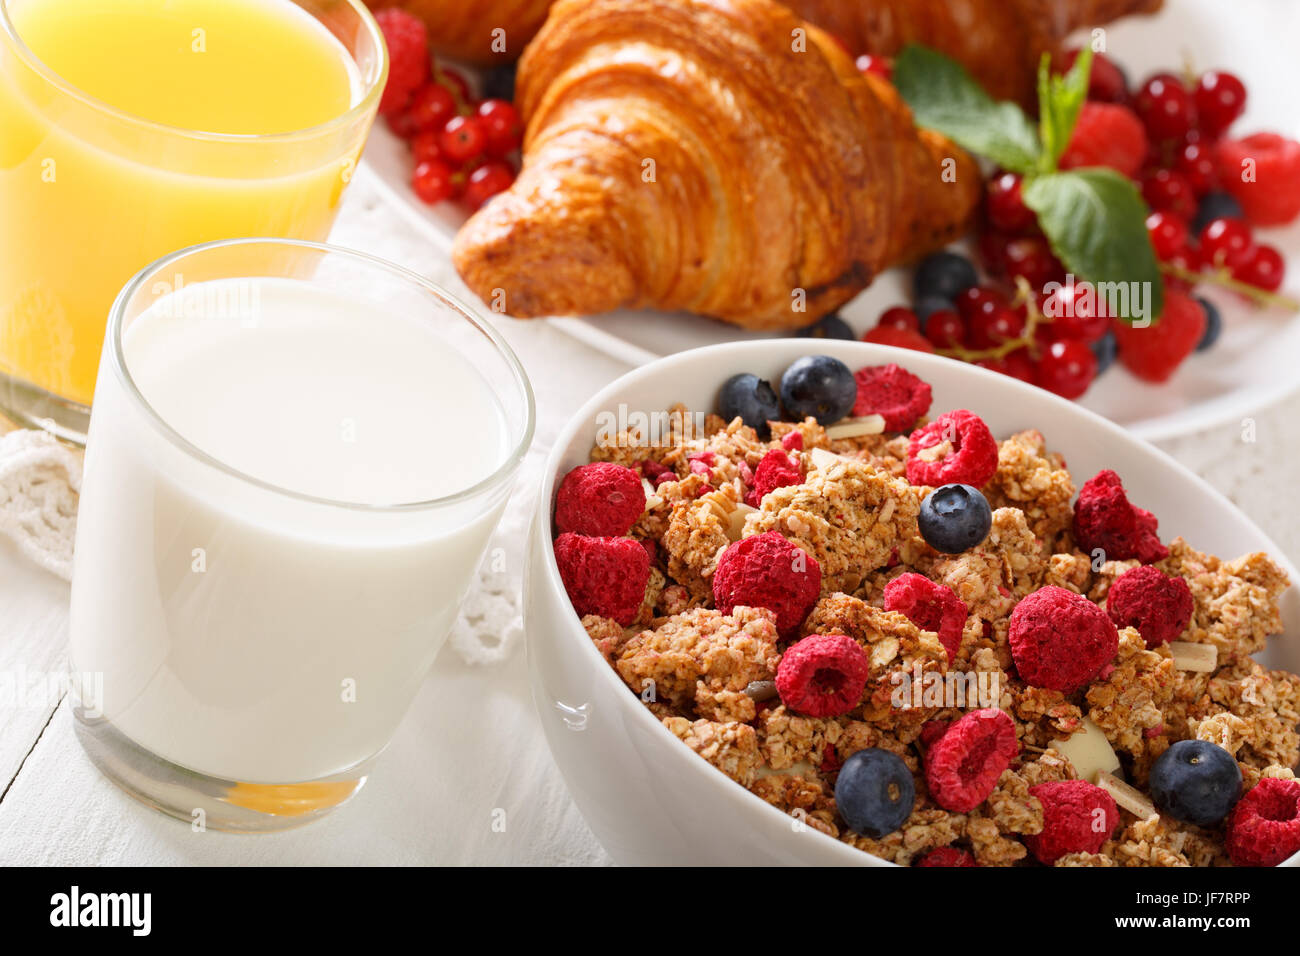 Baked granola with berries, as well as croissants, milk and juice close-up on the table. horizontal Stock Photo